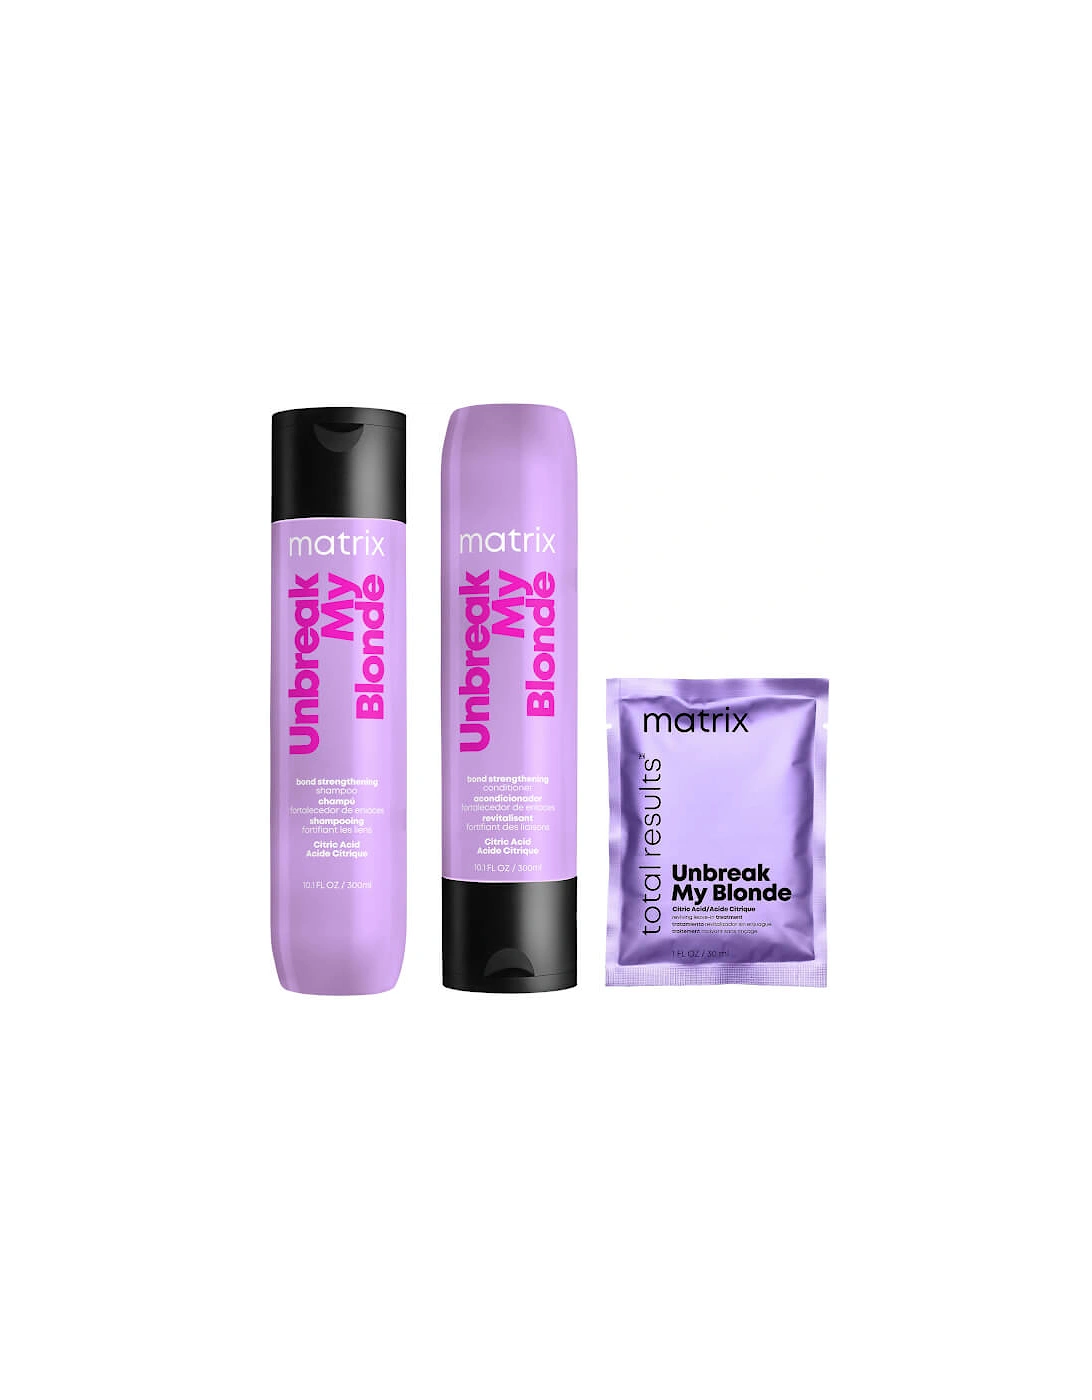 Unbreak My Blonde Shampoo 300ml, Conditioner 300ml + Mini Leave-in 30ml For Chemically Over-processed Hair (Worth £34.09), 2 of 1